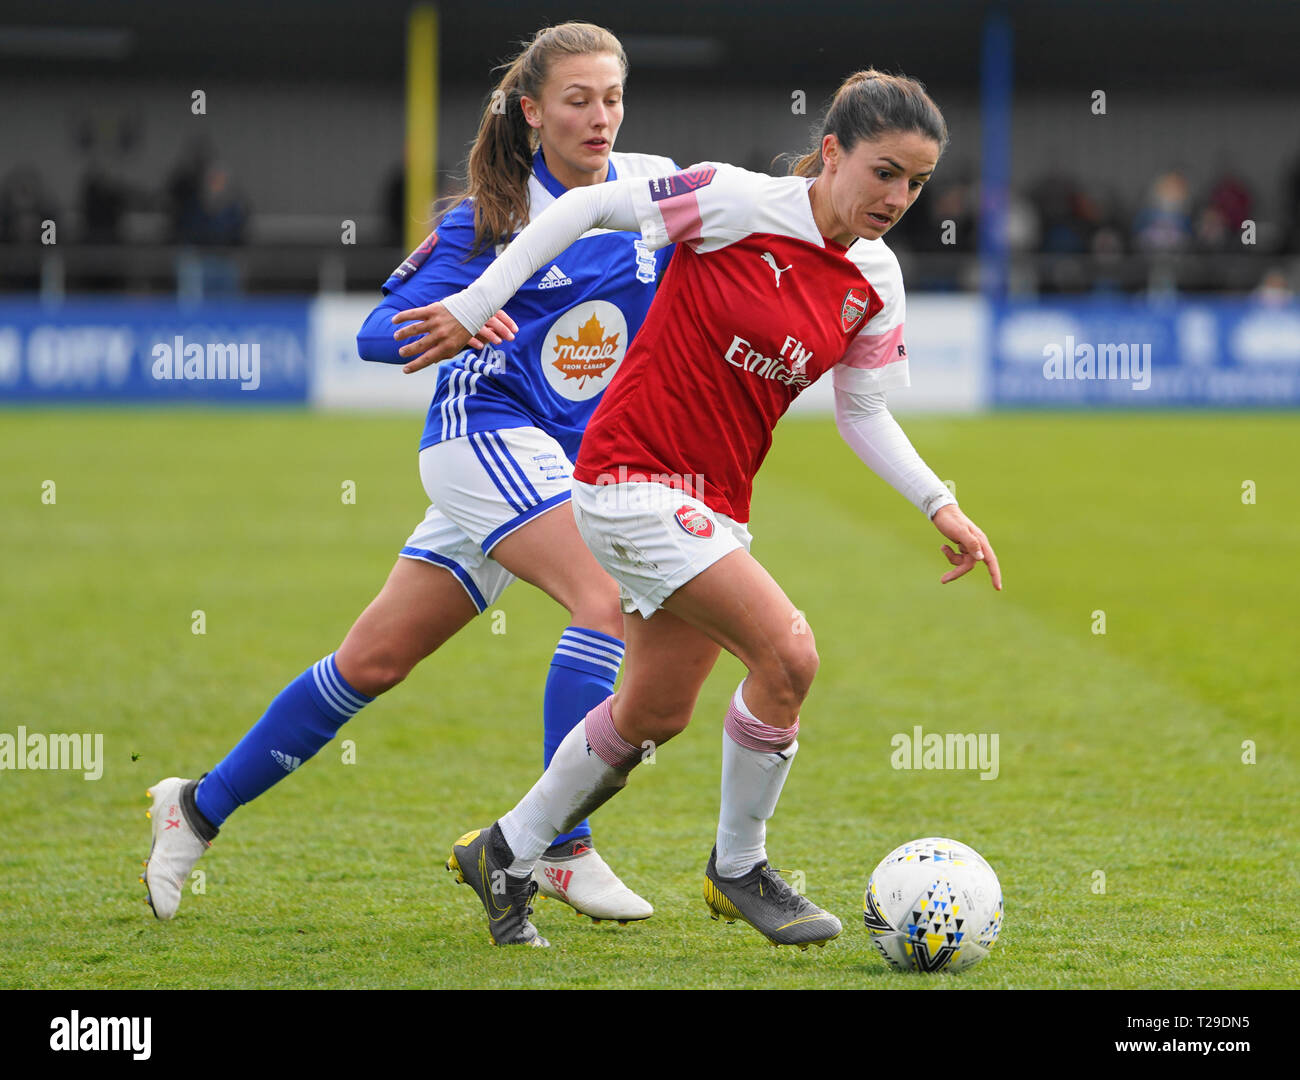 Solihull, UK. 31st Mar, 2019. SOLIHULL, ENGLAND - MARCH 31: Danielle Van De Donk of Arsenal pushing forward into the box during the FA Women's Super League football match between Birmingham City Women vs Arsenal Women at Solihull Moors FC, Damson Park on March 31, 2019 in Solihull, England. Credit: Action Foto Sport/Alamy Live News Stock Photo